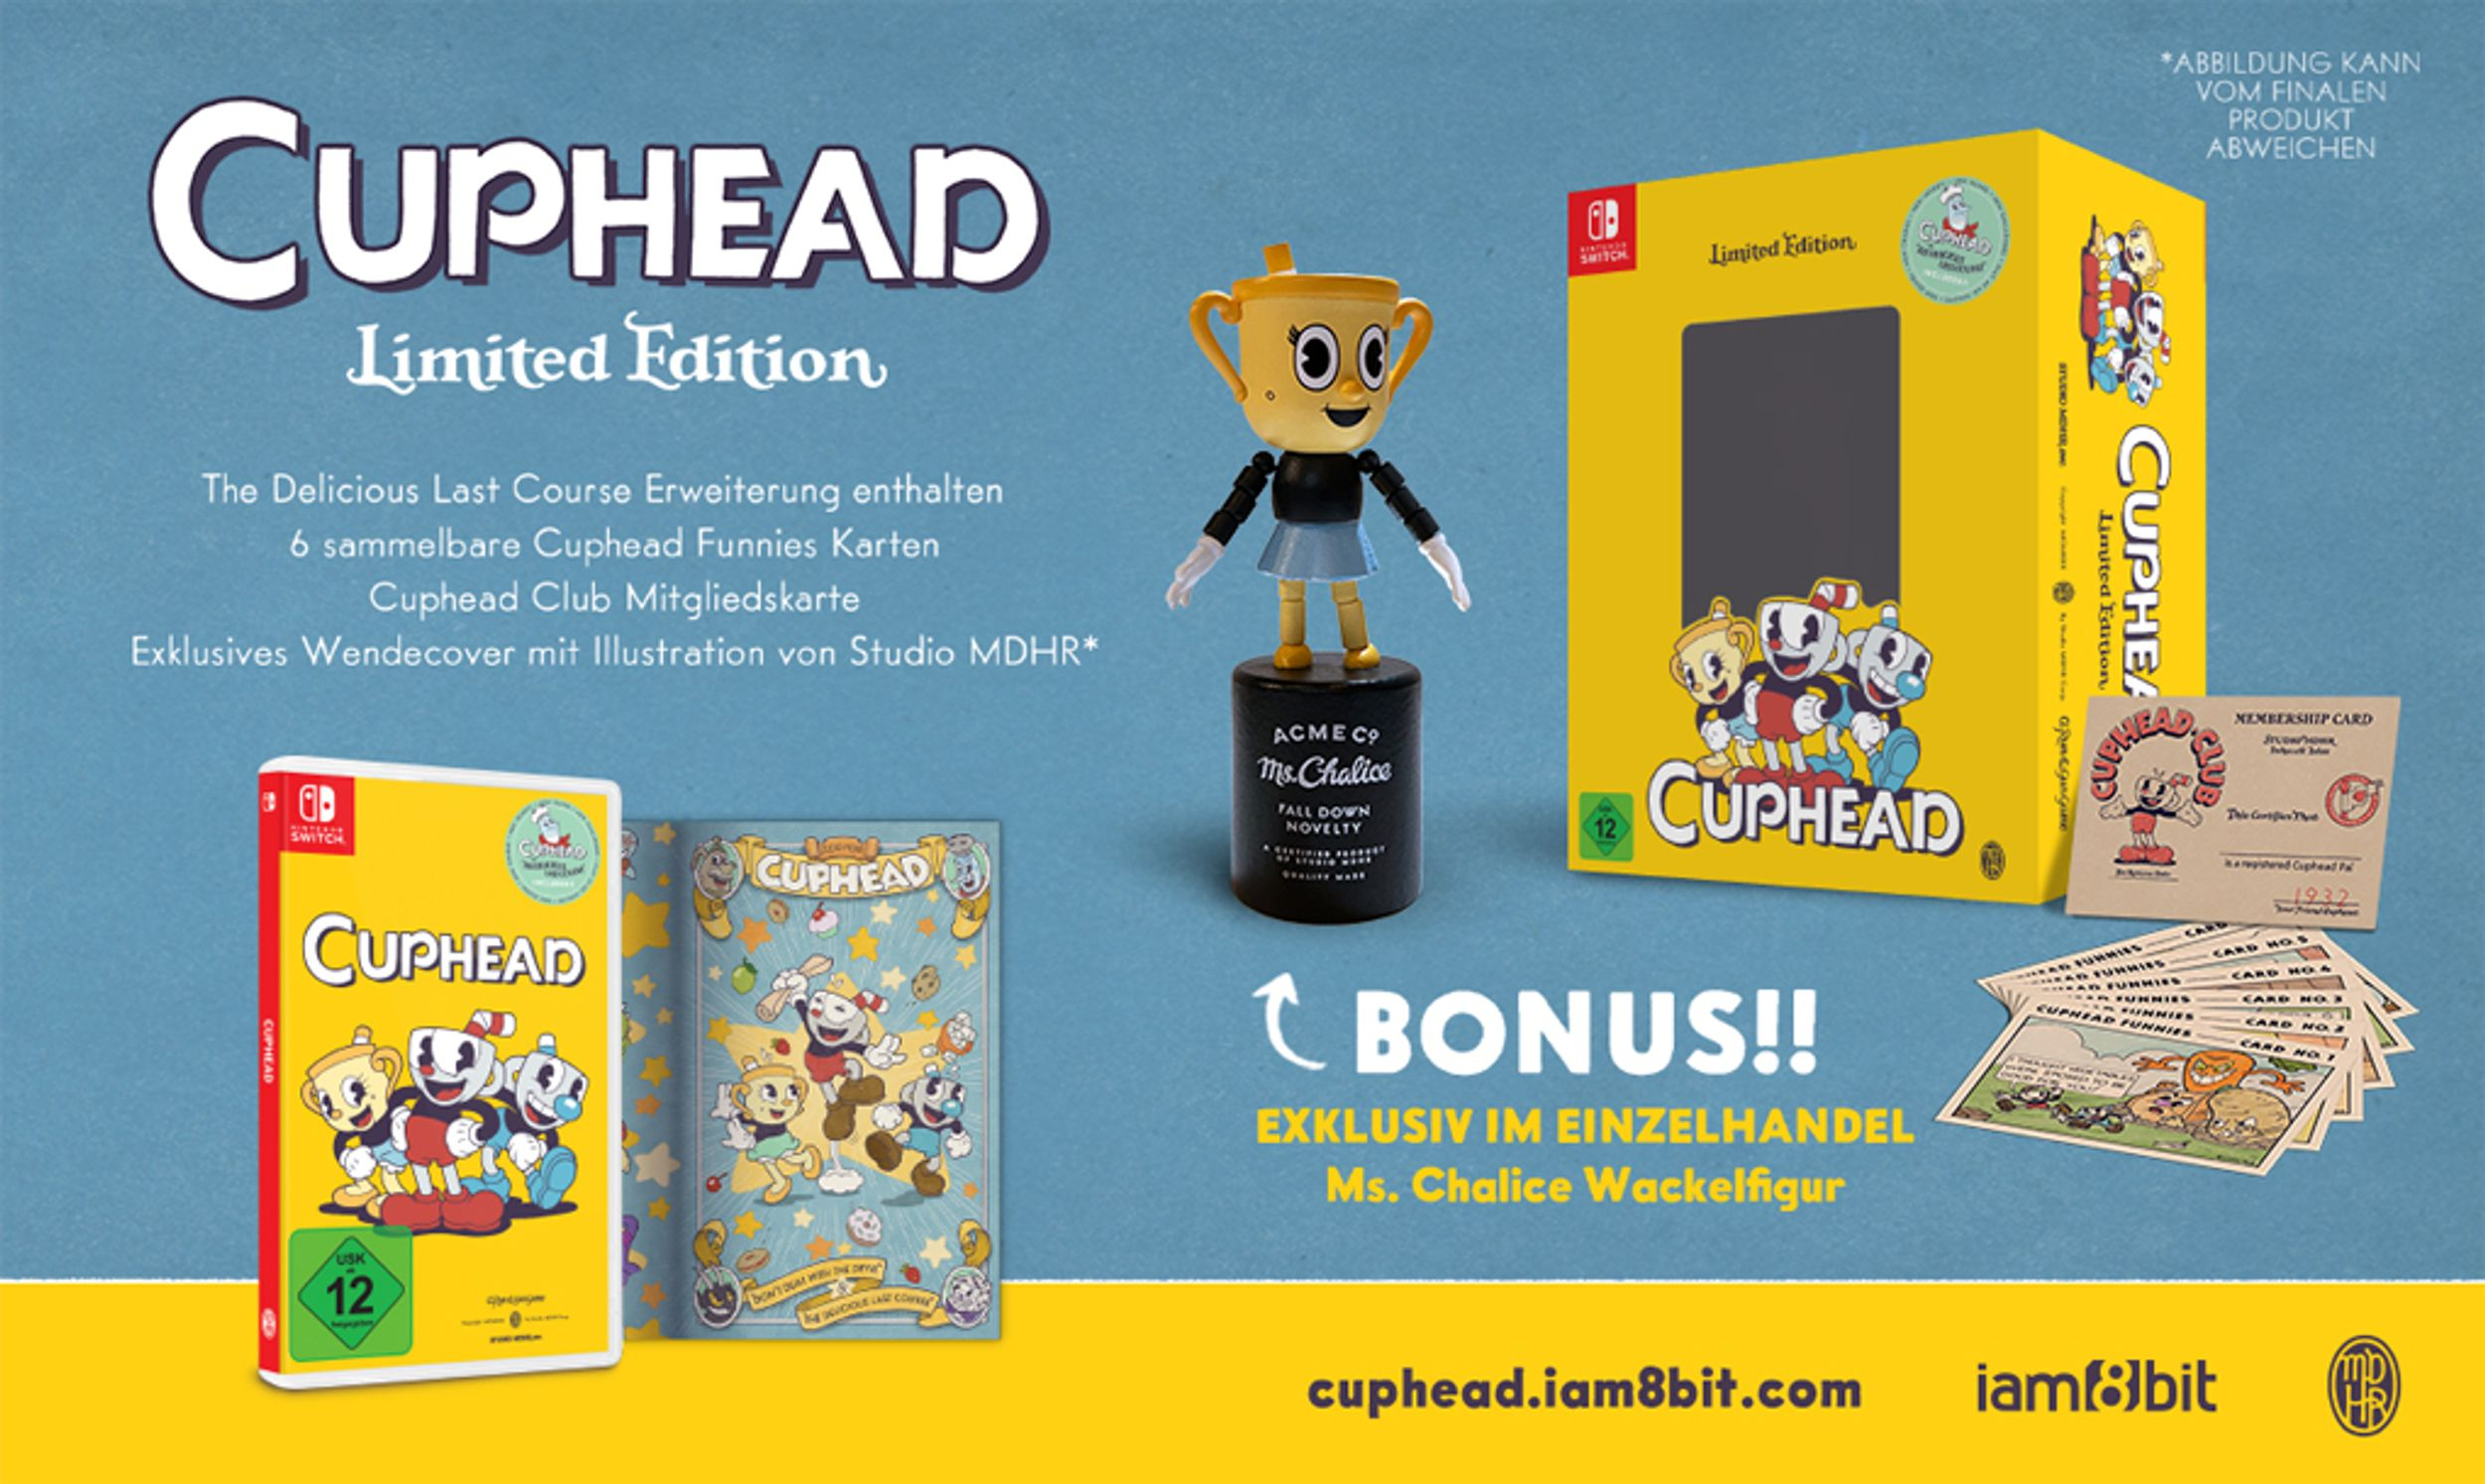 SW (LIMITED [Nintendo EDITION) CUPHEAD - Switch]